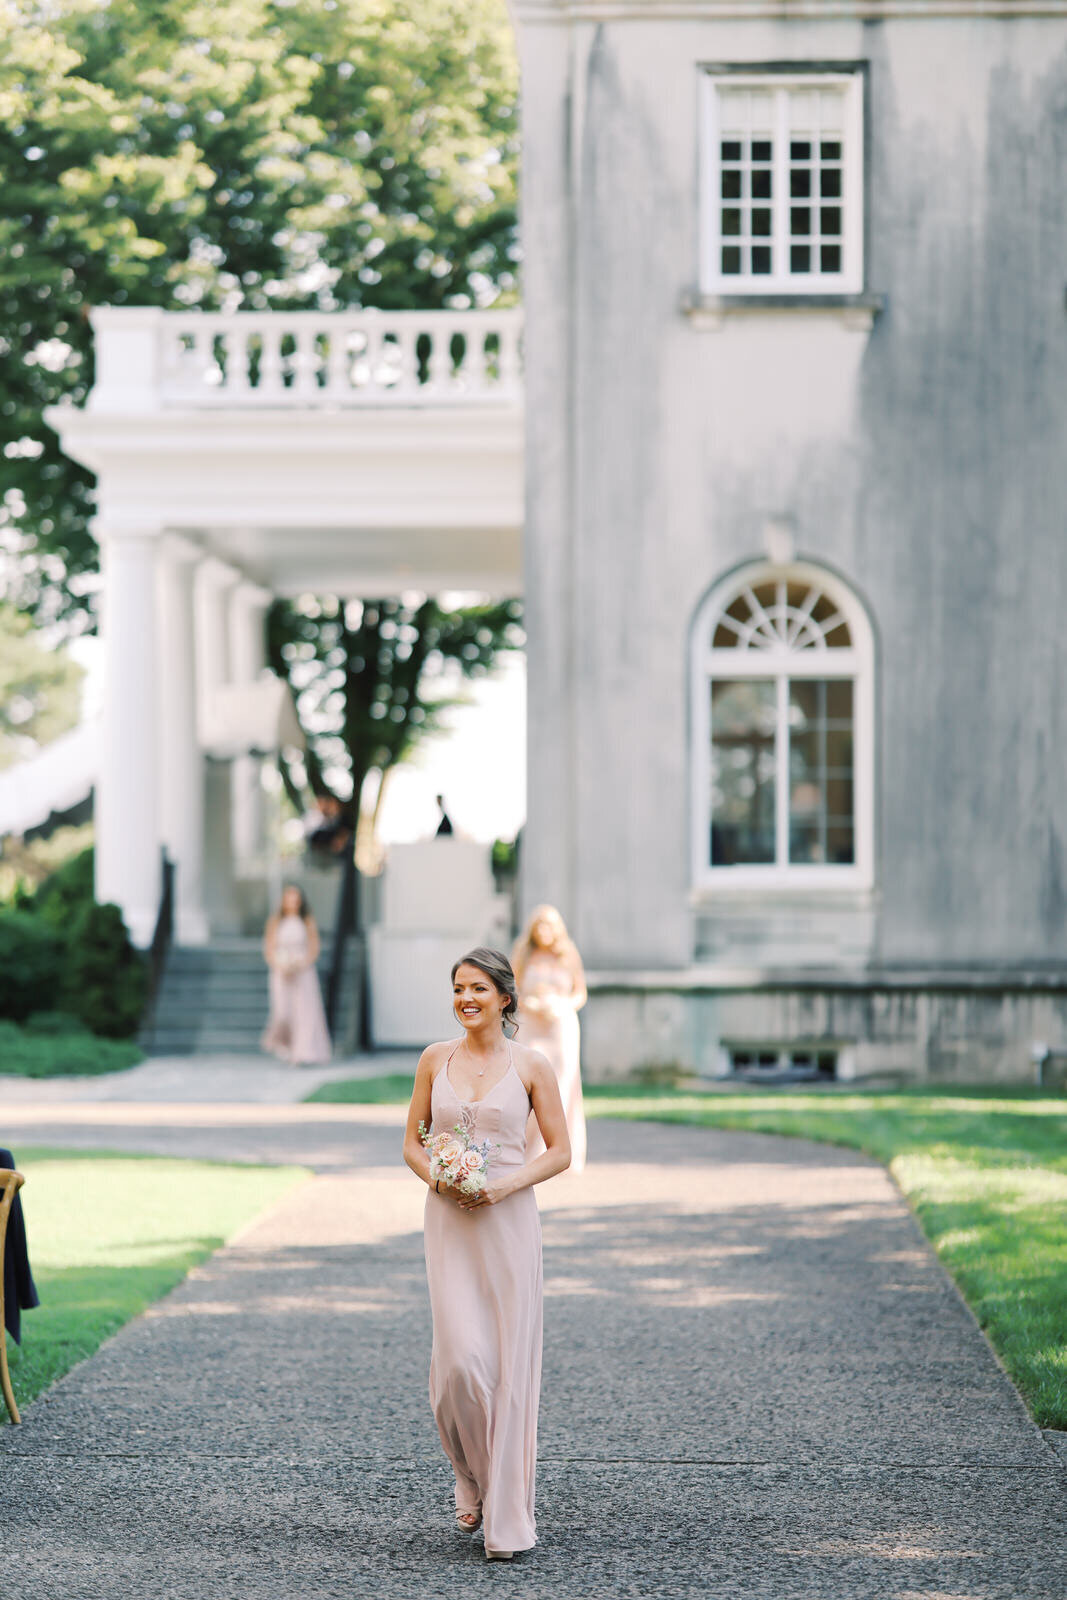 Chic wedding photography at Strong Mansion, a historic wedding venue in Dickerson Maryland.